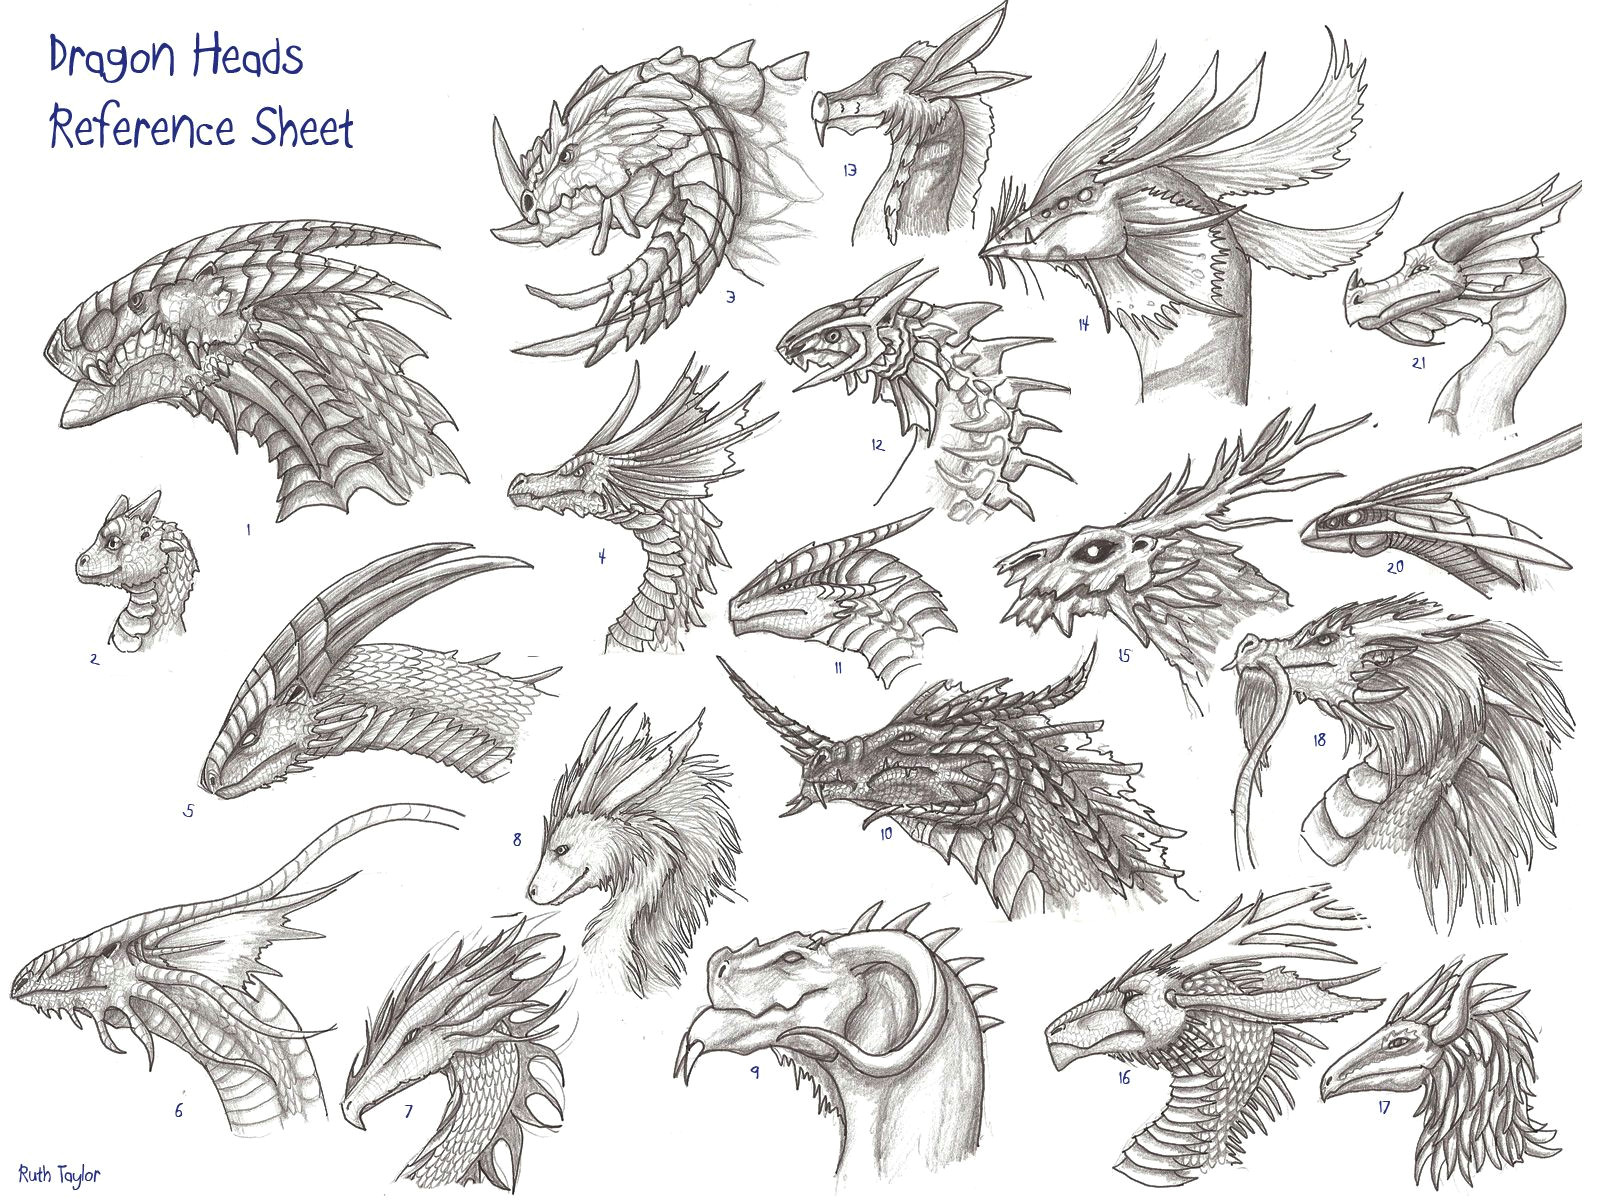 Drawings Of Dragons Heads Head Reference Image Dragon Heads Reference Sheet by Archir On